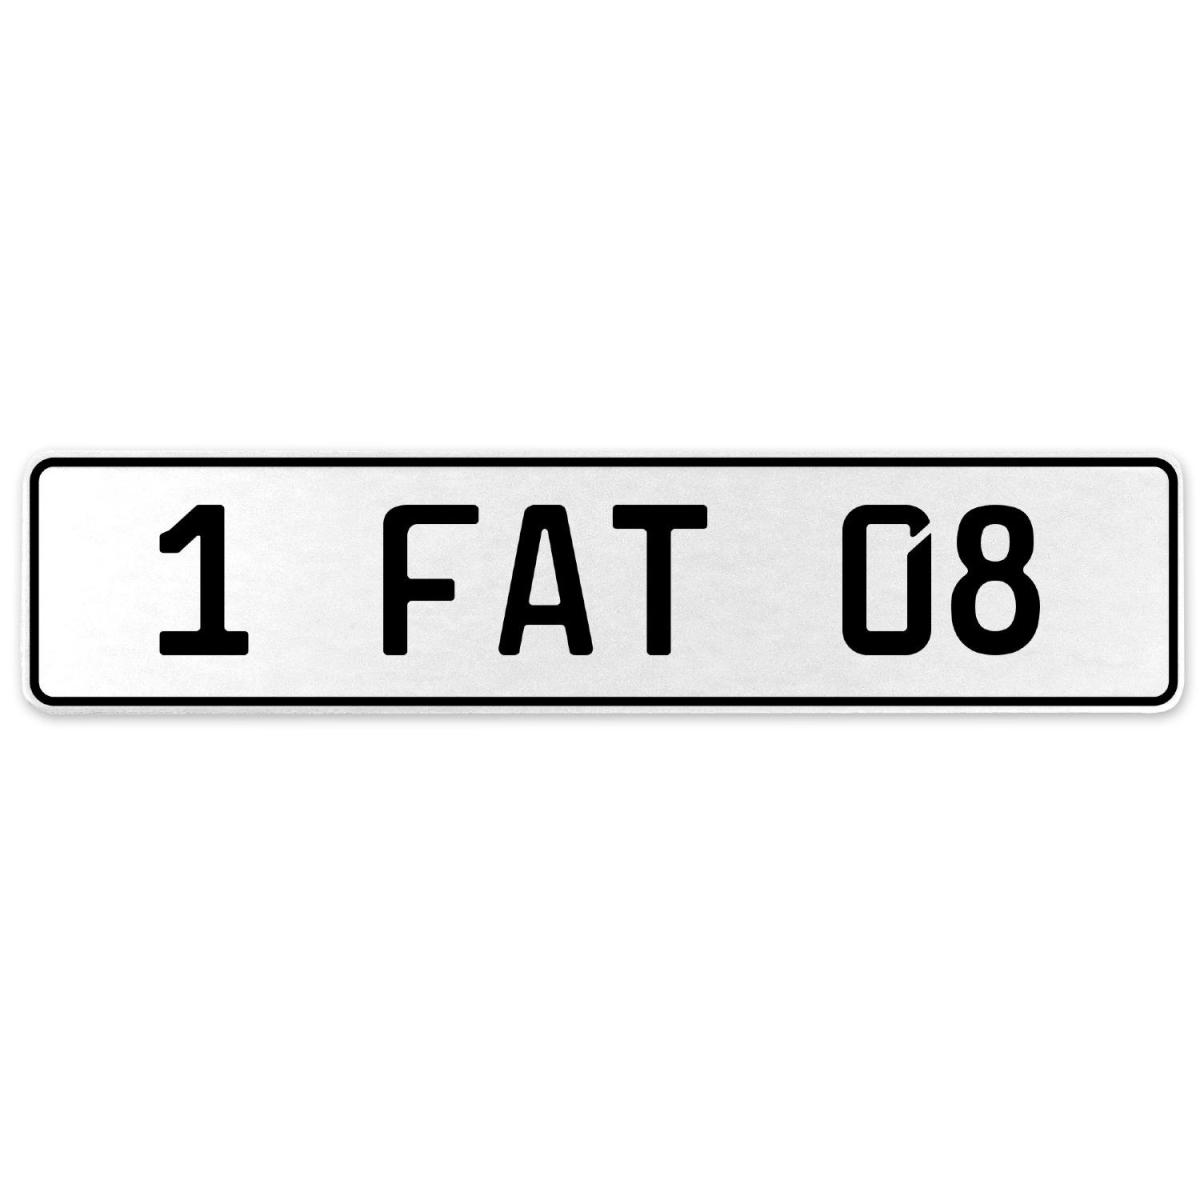 554605 1 Fat 08 - White Aluminum Street Sign Mancave Euro Plate Name Door Sign Wall